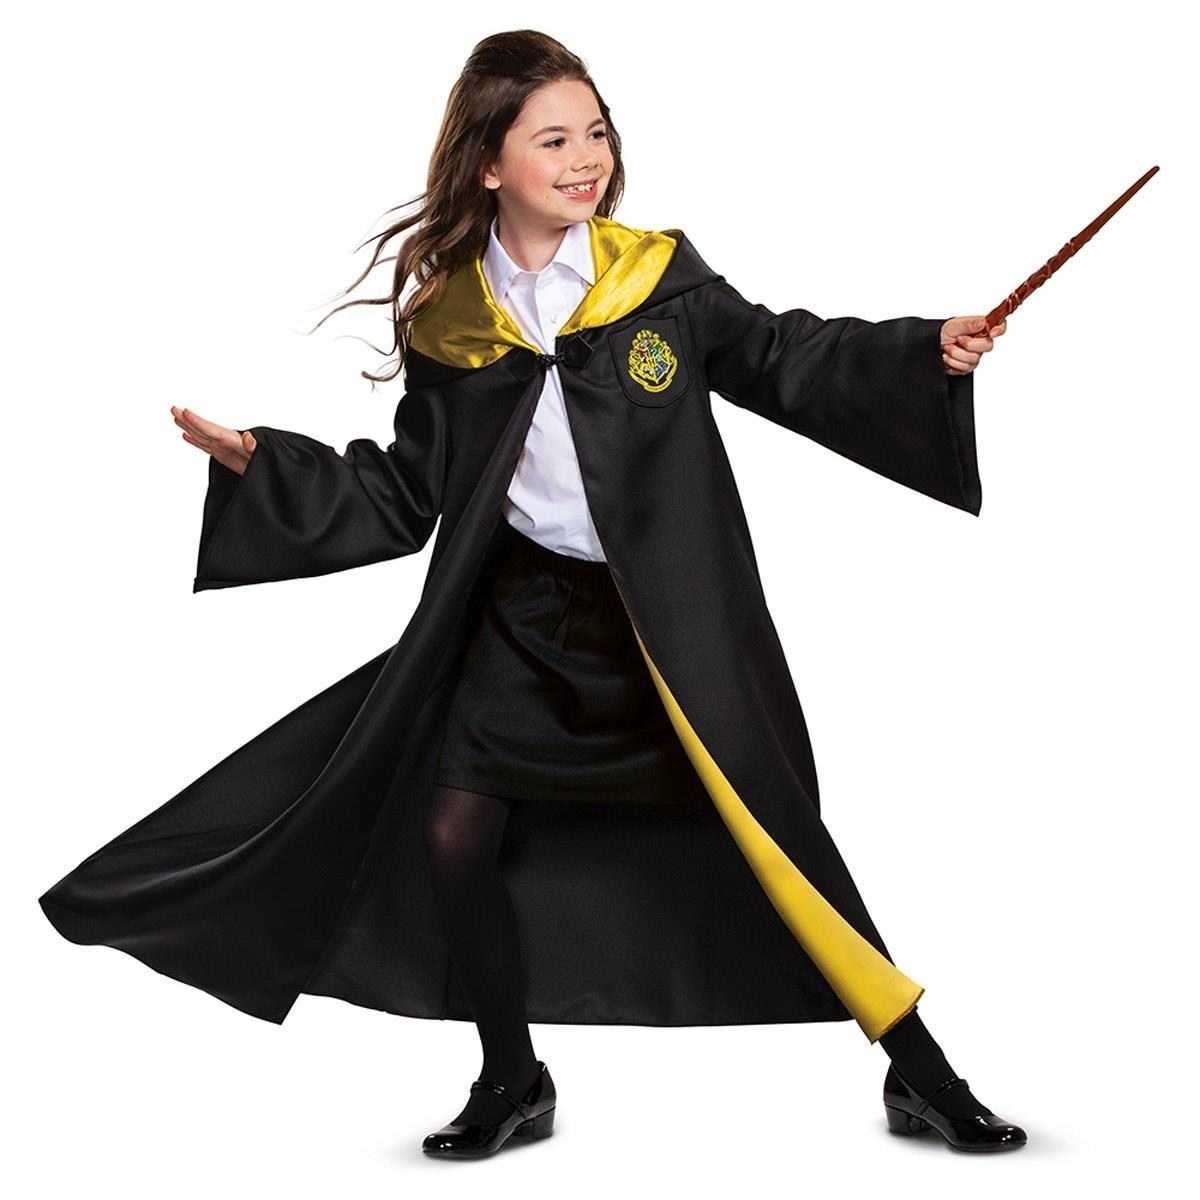 Harry Potter Hogwarts Robe Cloak Deluxe Kidz Size S 4/6 Hooded Cape Costume Disguise